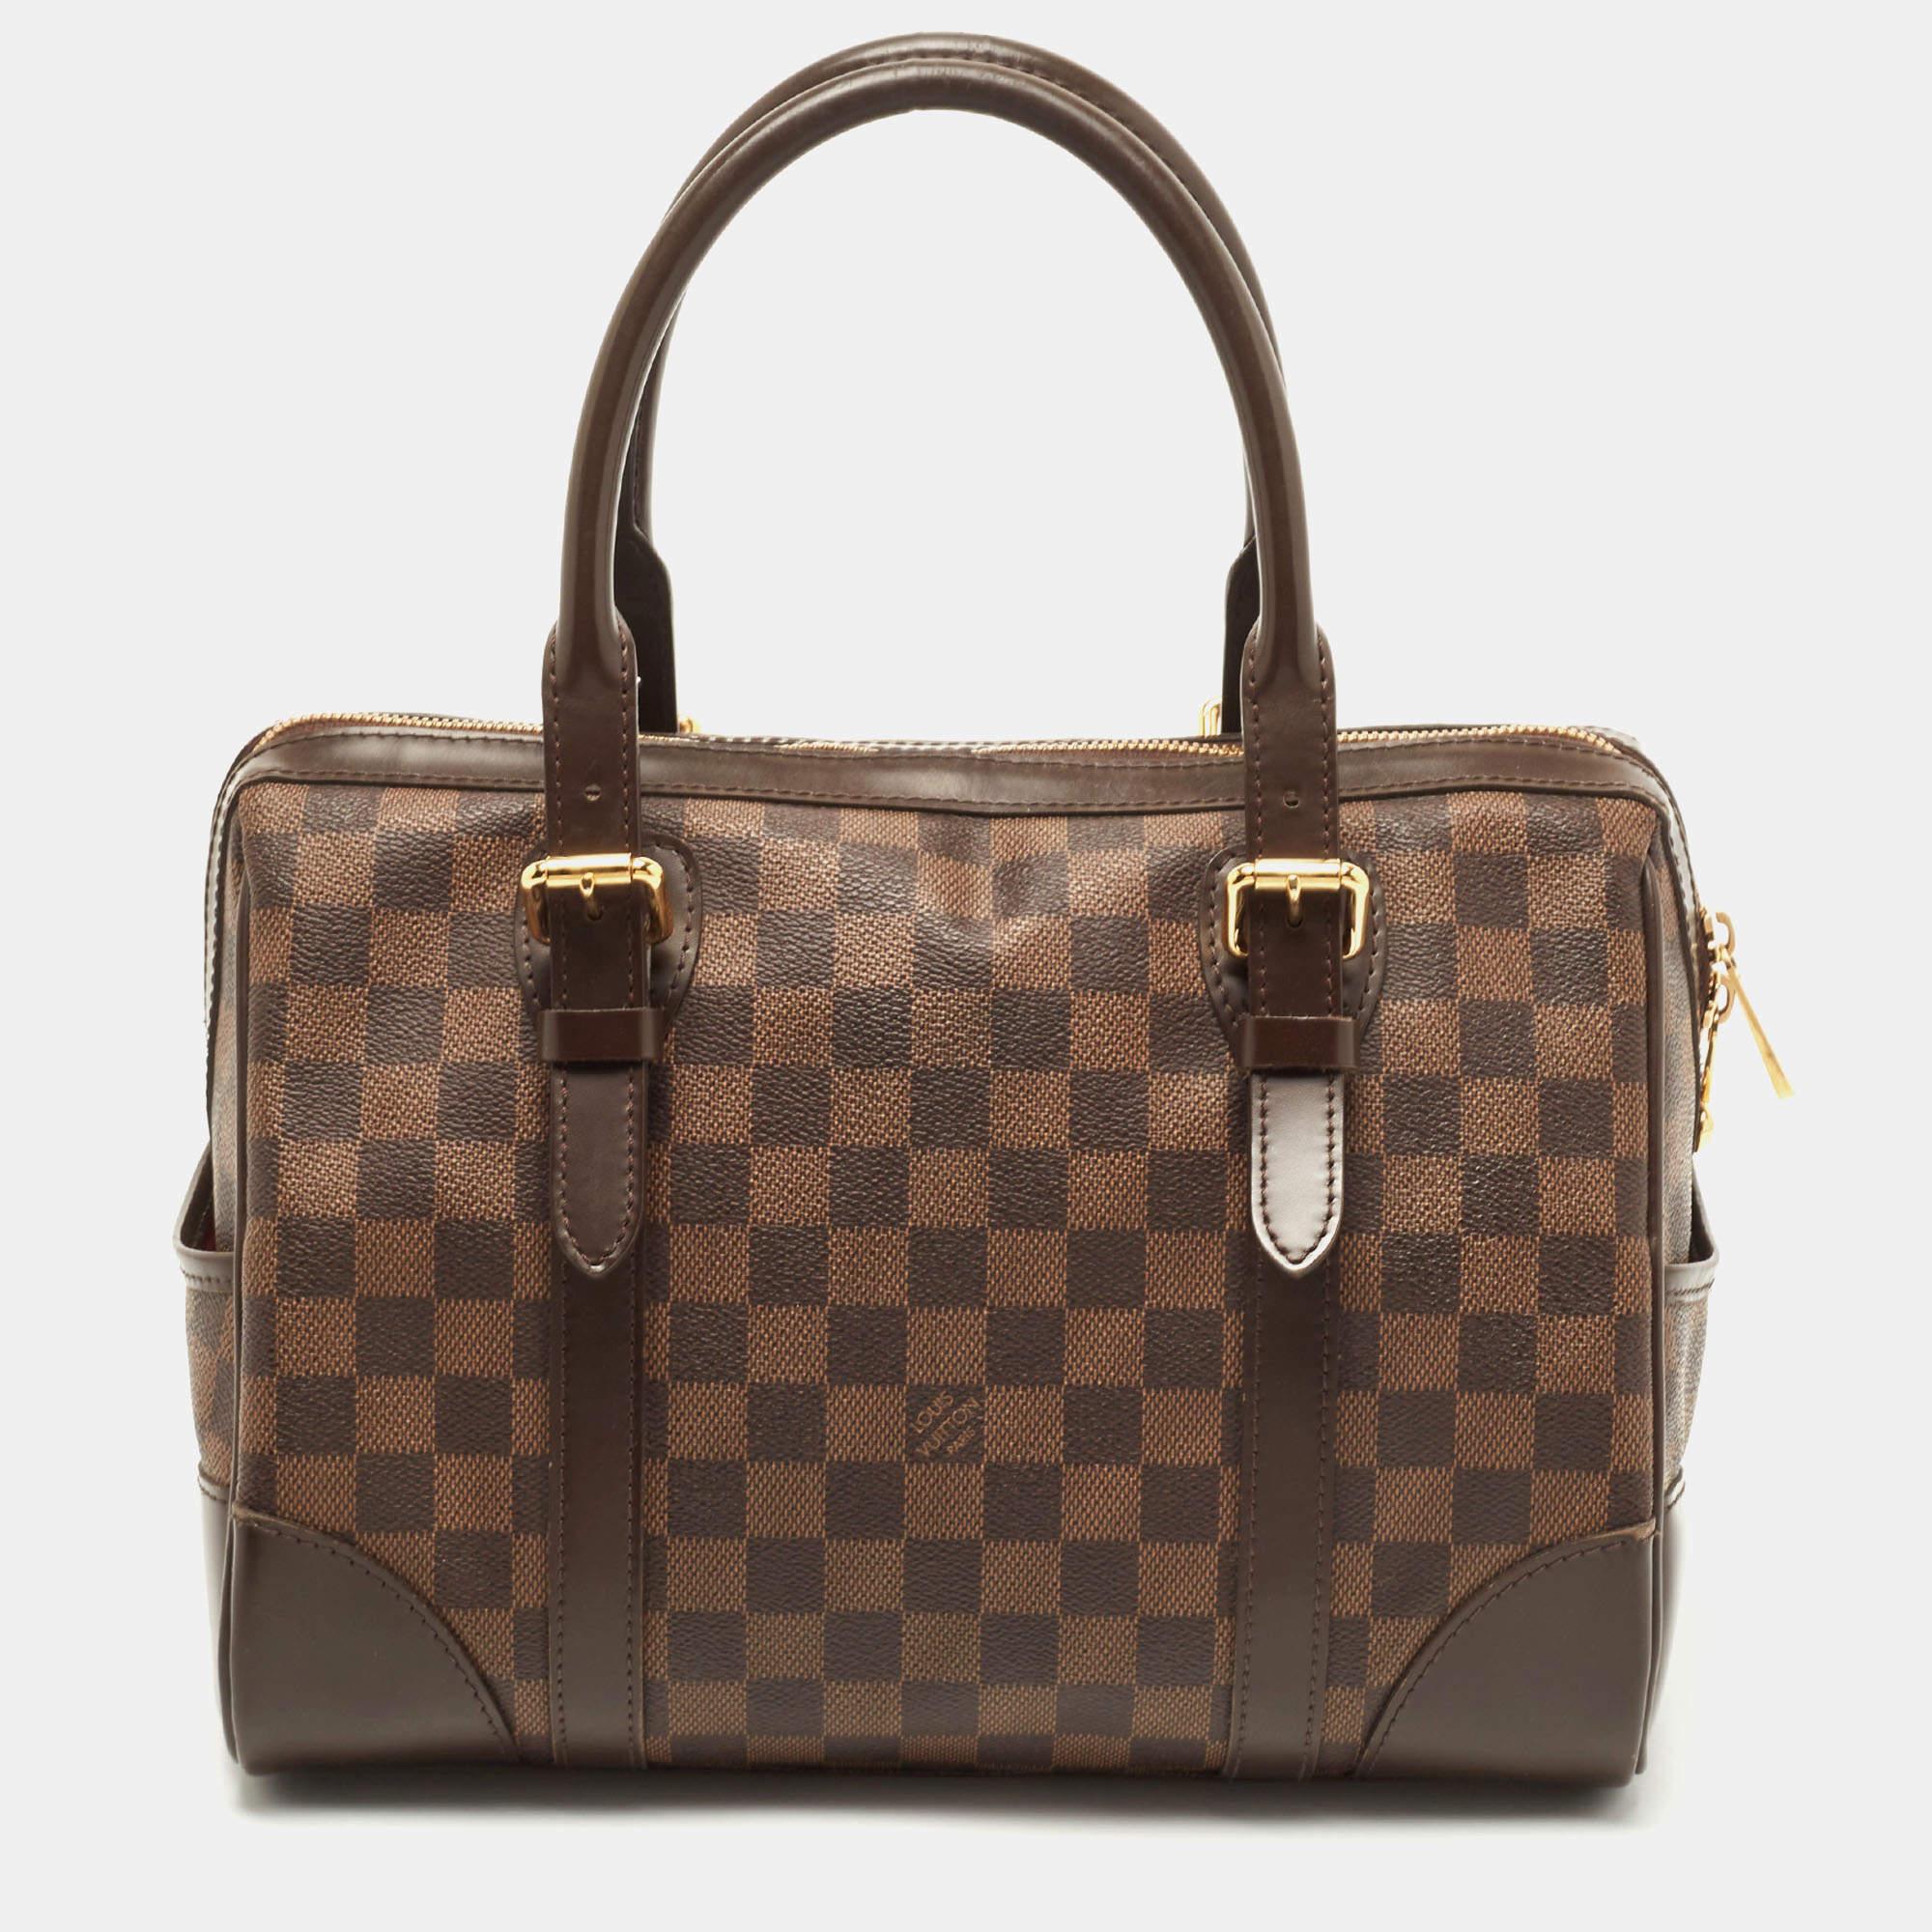 Combining Louis Vuitton’s rich heritage with its exquisite craftsmanship, this Berkeley bag is an investment piece. Softly structured from signature Damier Ebene canvas, this fabulous style is finished with tonal brown leather reinforced corner